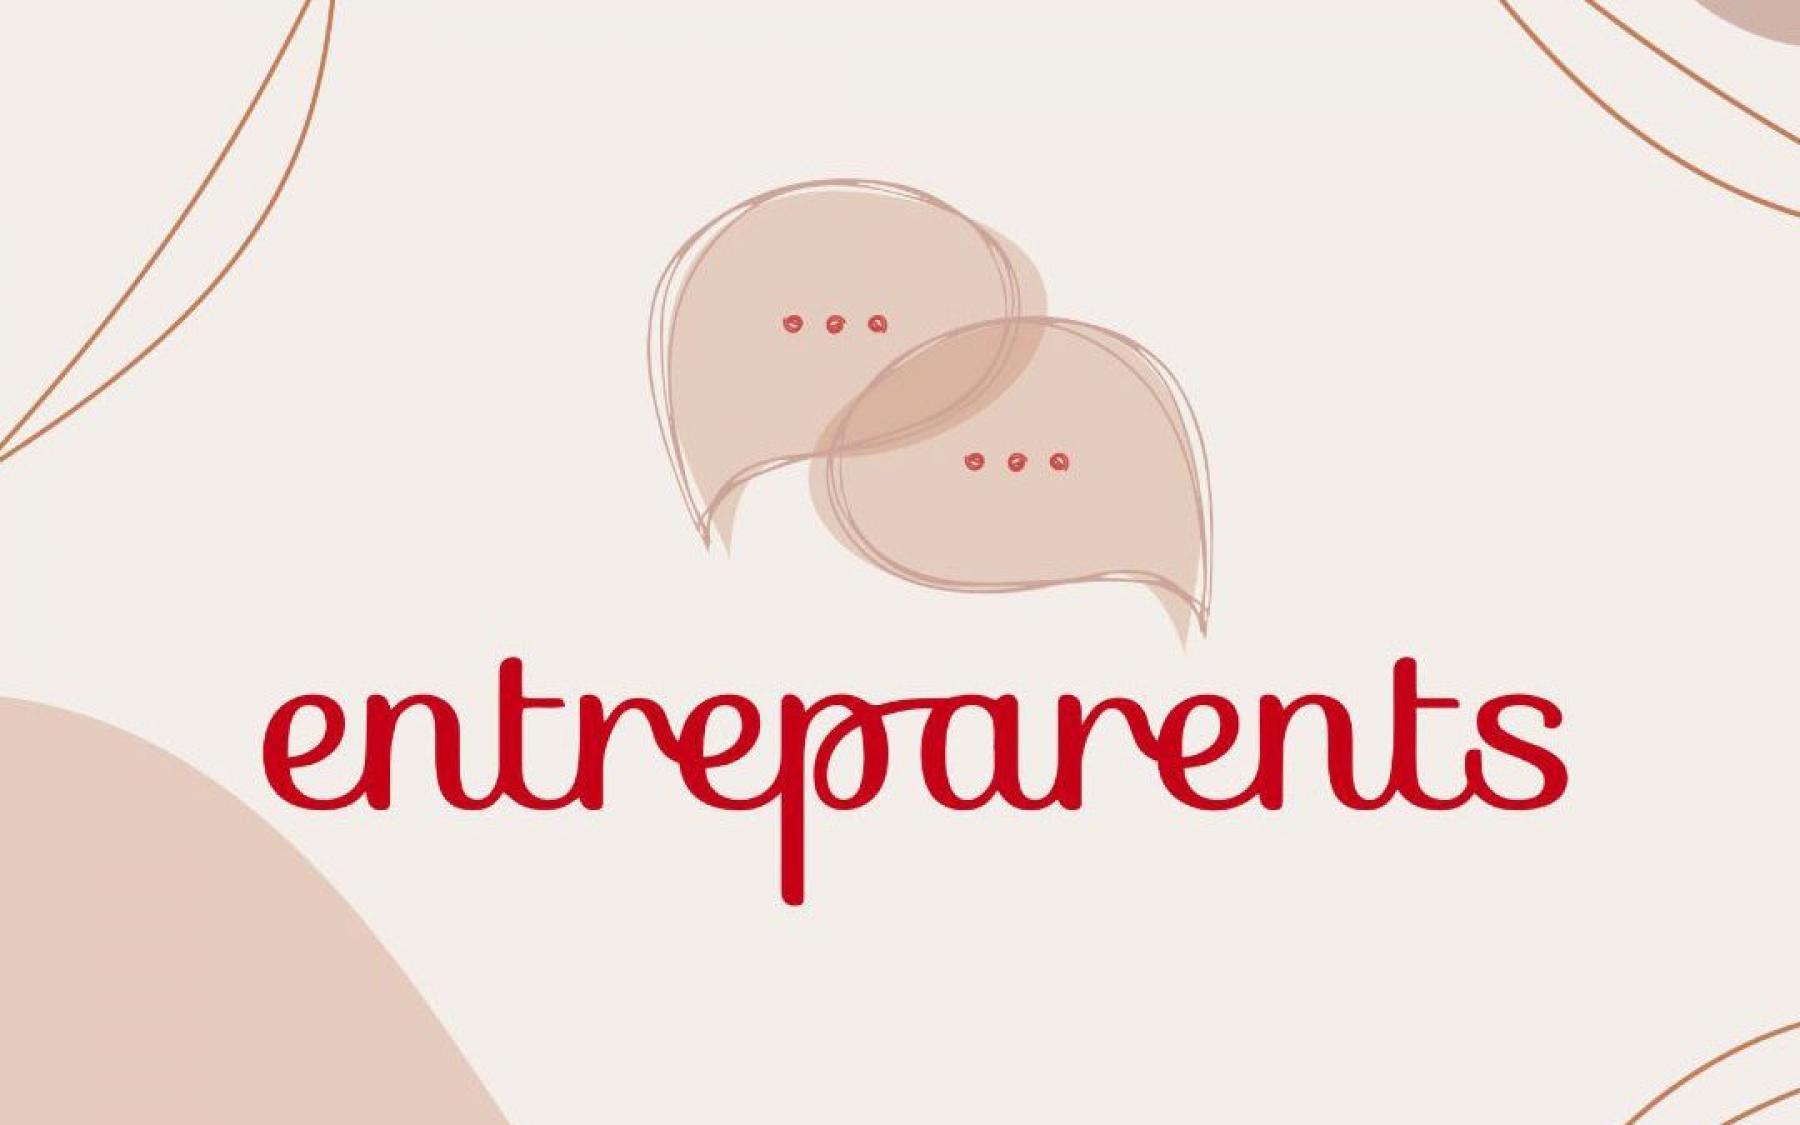 The Cuomo Foundation funds “Entreparents” a digital resource for new parents